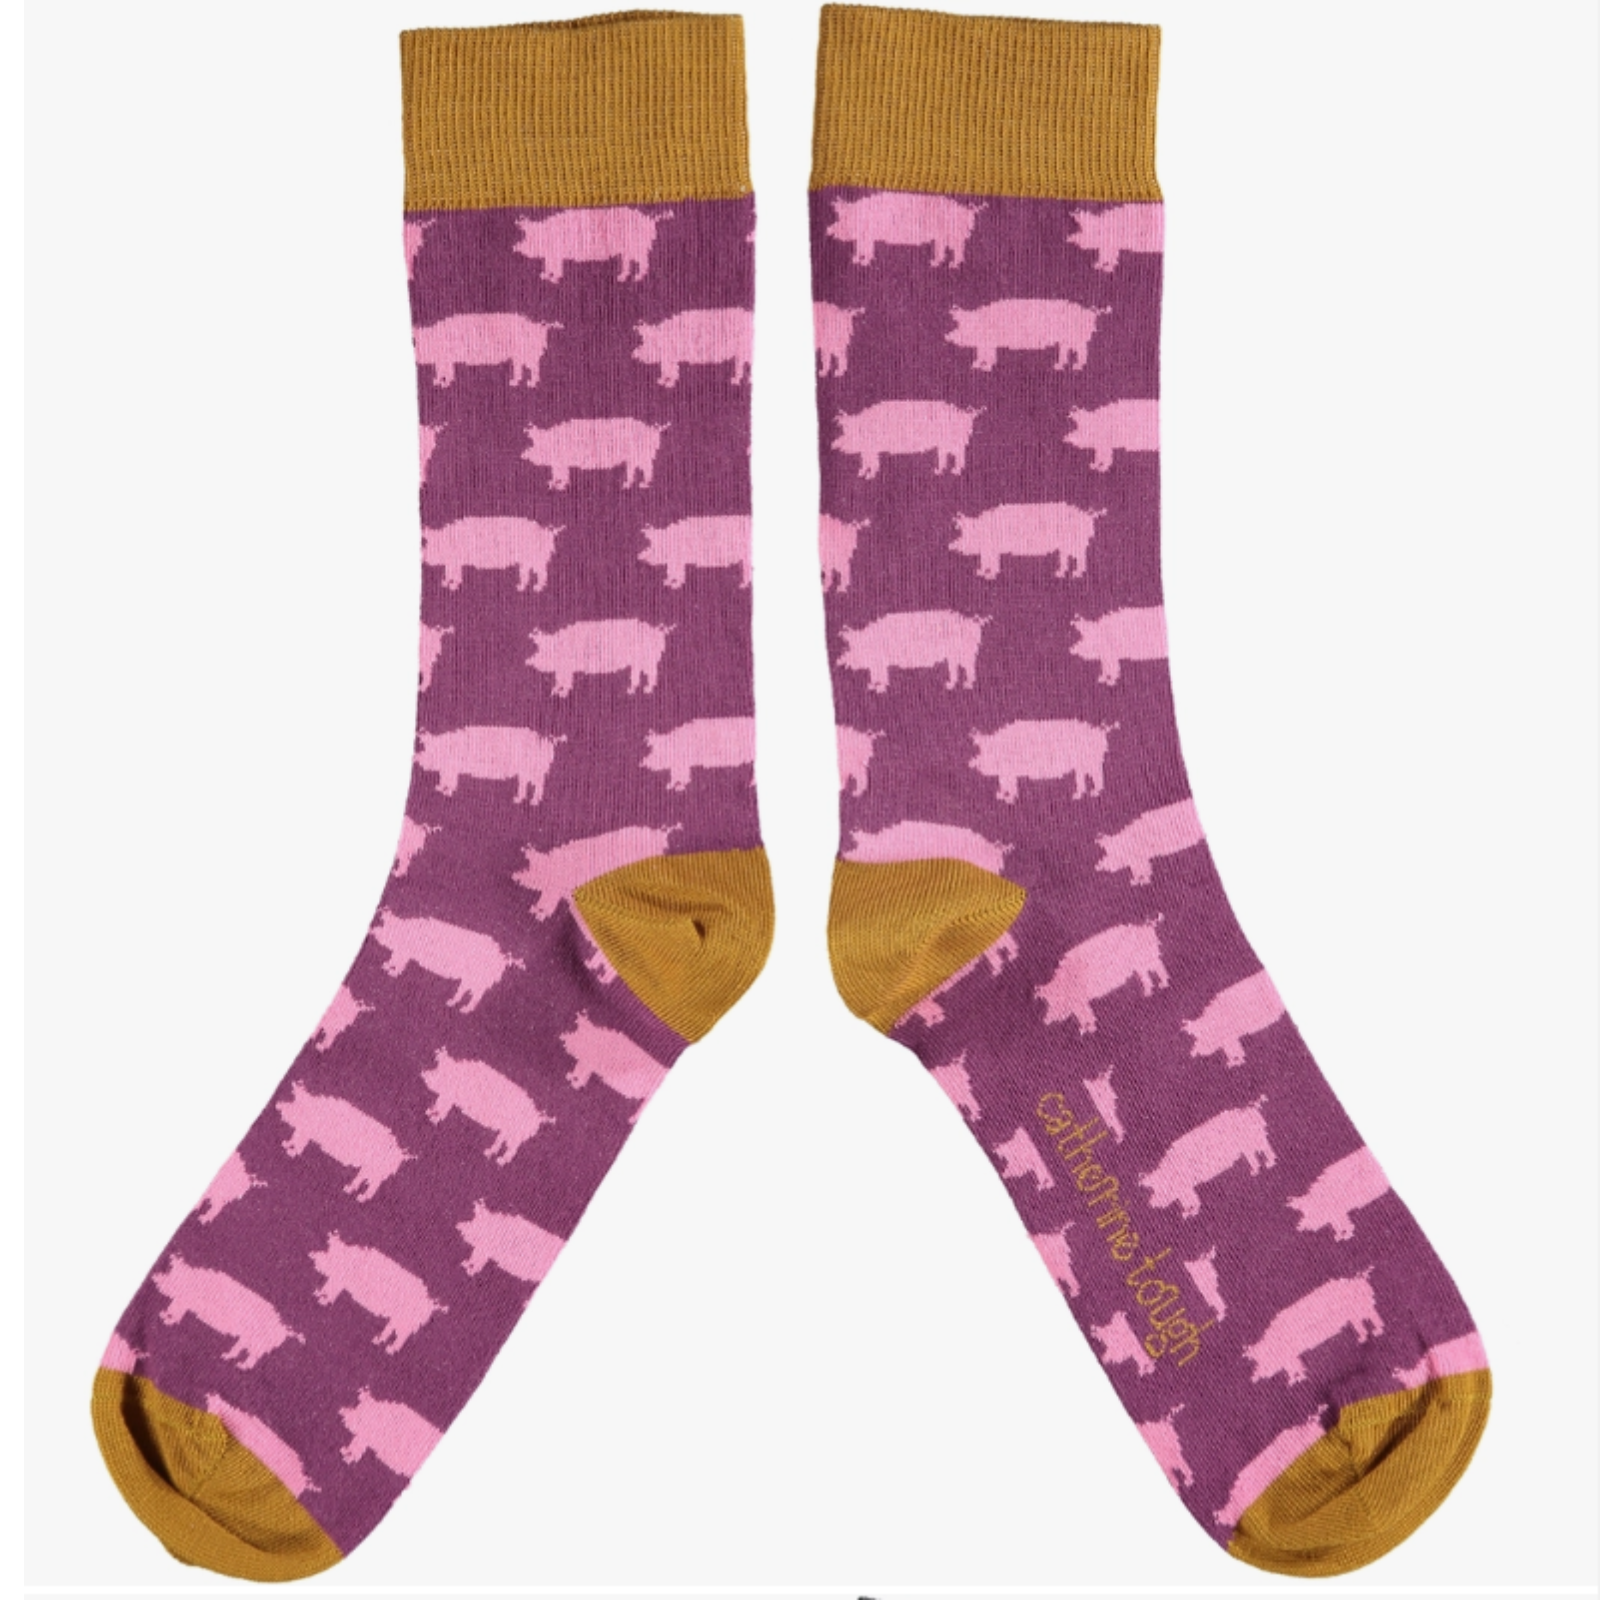 Catherine Tough Pig cotton men's crew socks. The design features pink pigs on a plum base framed with ginger cuffs, heels & toes